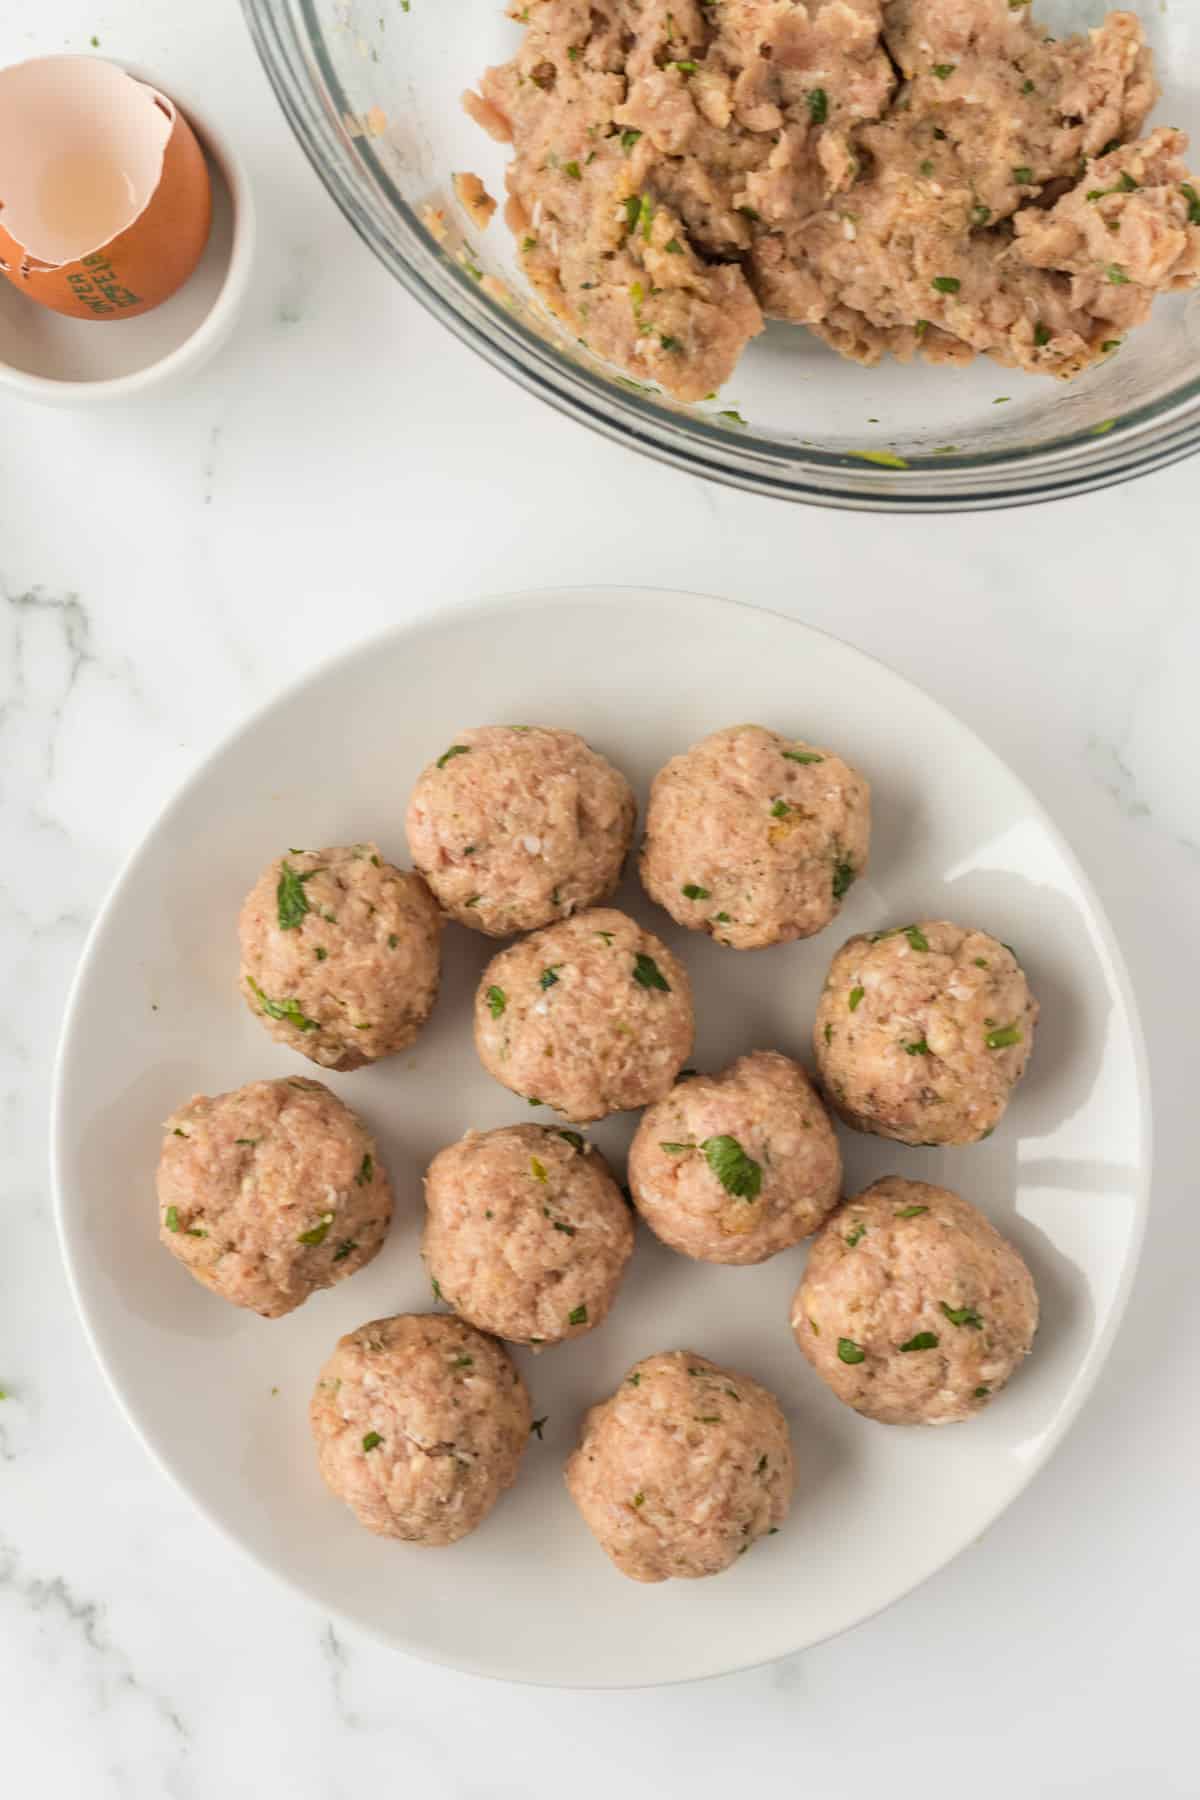 uncooked meatballs on a white plate.